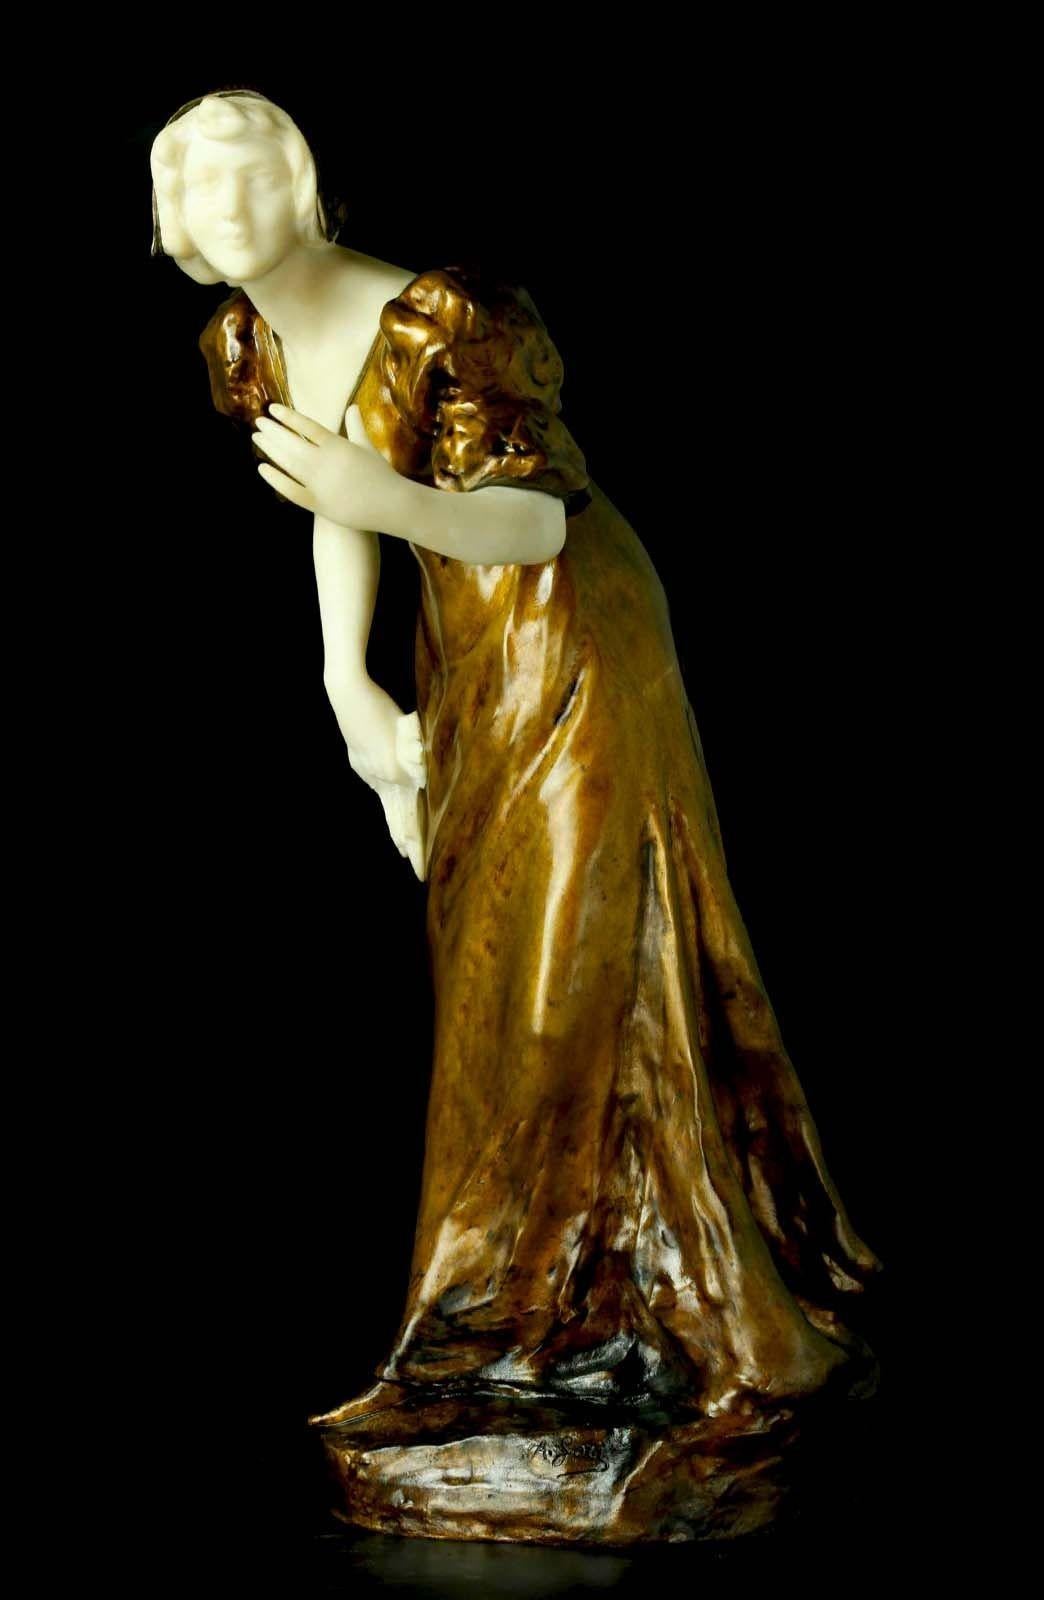 Alluring sculpture made of gilt bronze and marble by Affortunato Gory, depicting a walking lady with traditional attire and appears to be grabbing a cloth towel as well. Made in France, c. 1920's.
Signed 